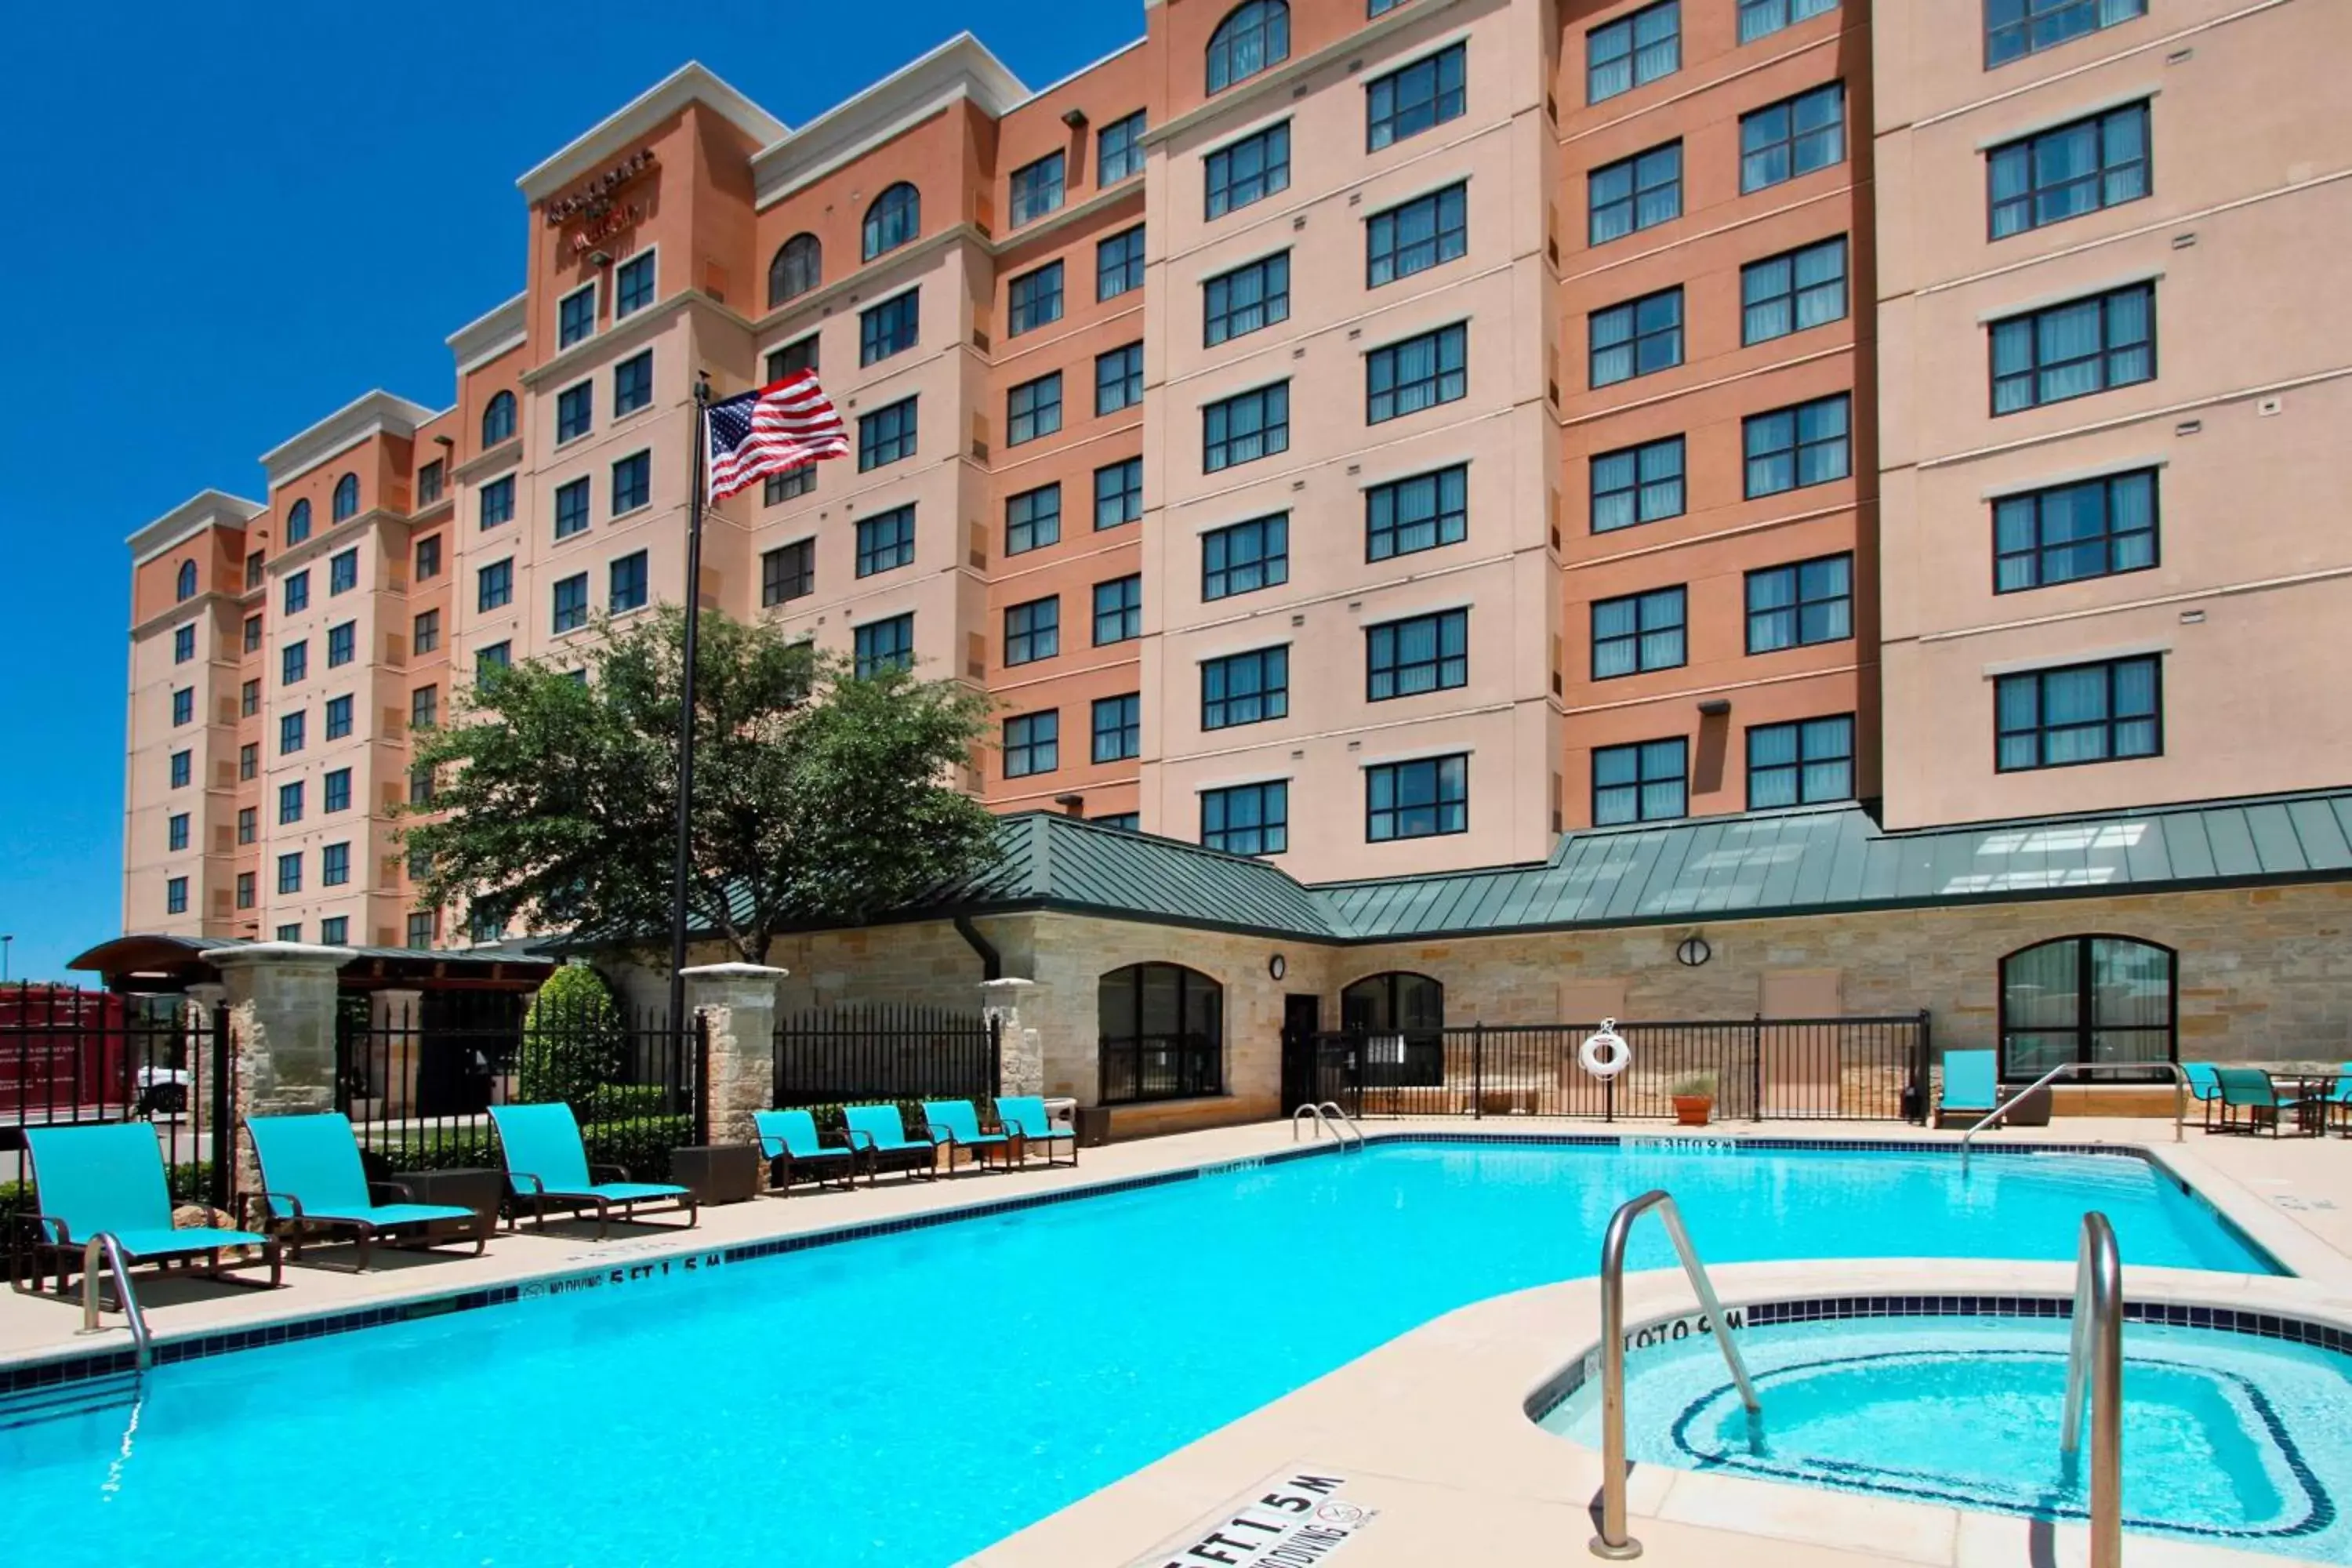 Swimming pool, Property Building in Residence Inn DFW Airport North/Grapevine